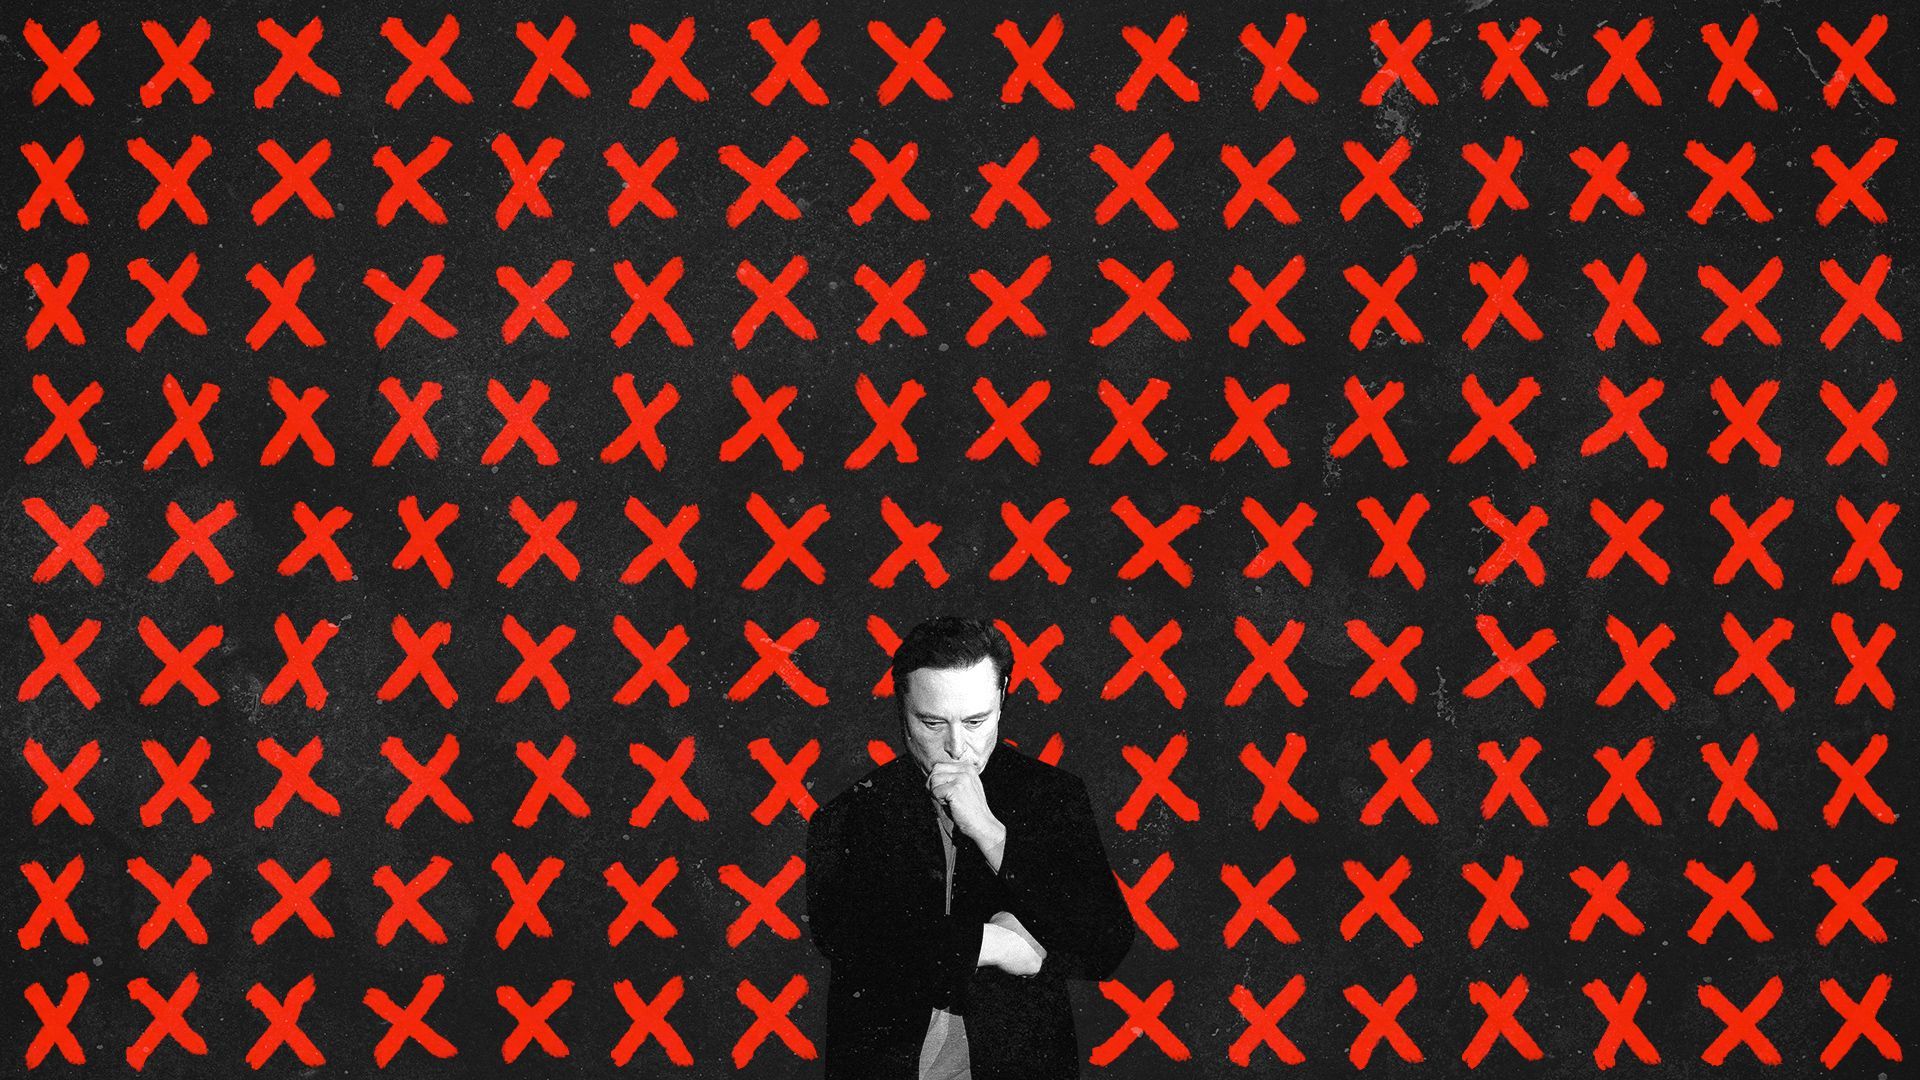 Photo illustration of Elon Musk looking worried and surrounded by bright red X's. 